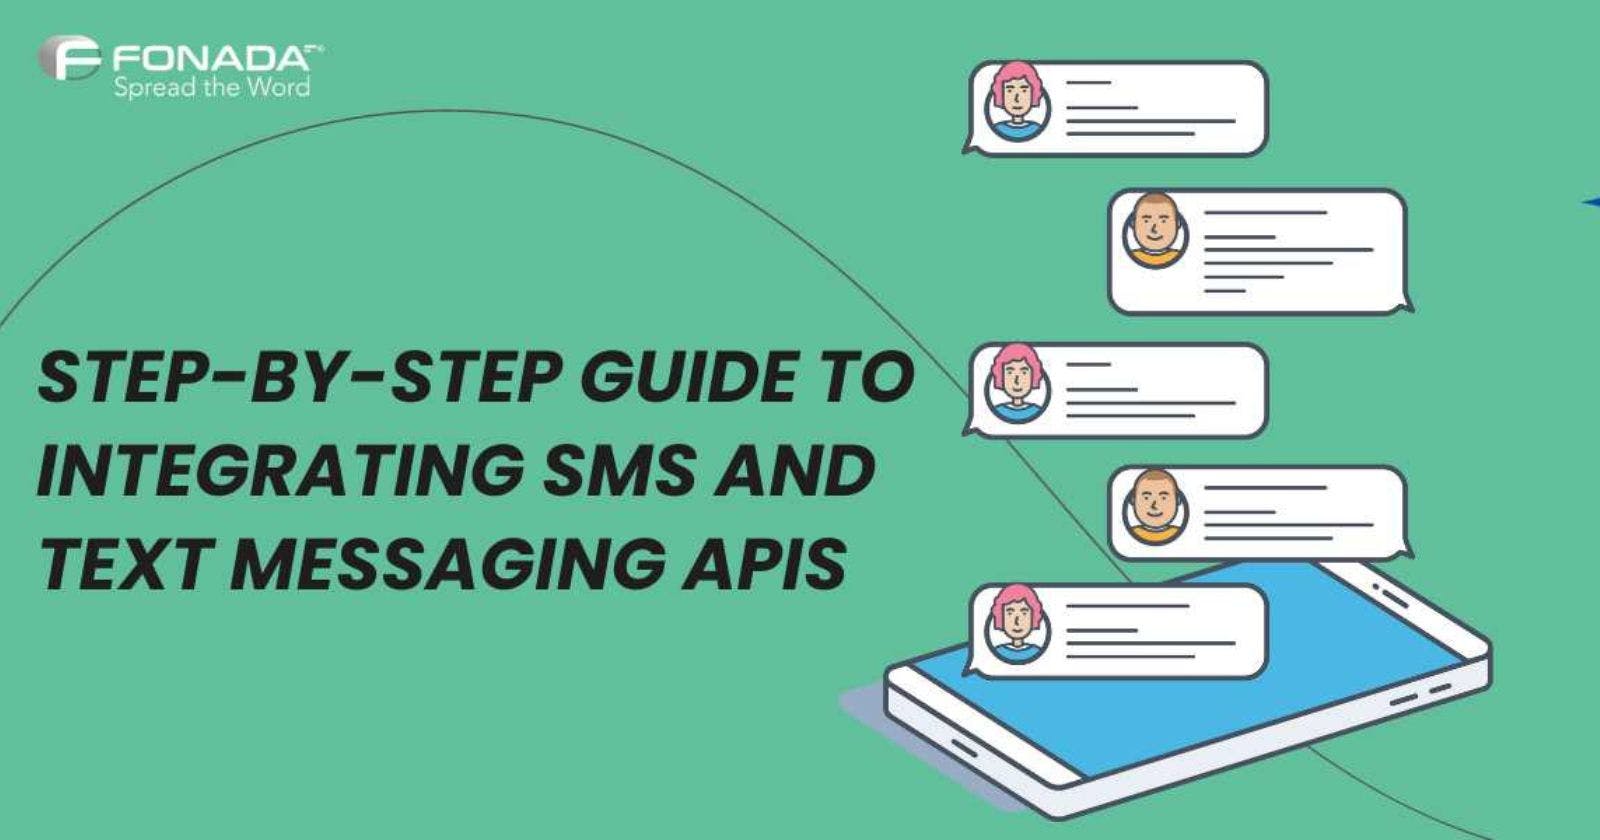 Step-by-Step Guide to Integrating SMS and Text Messaging APIs